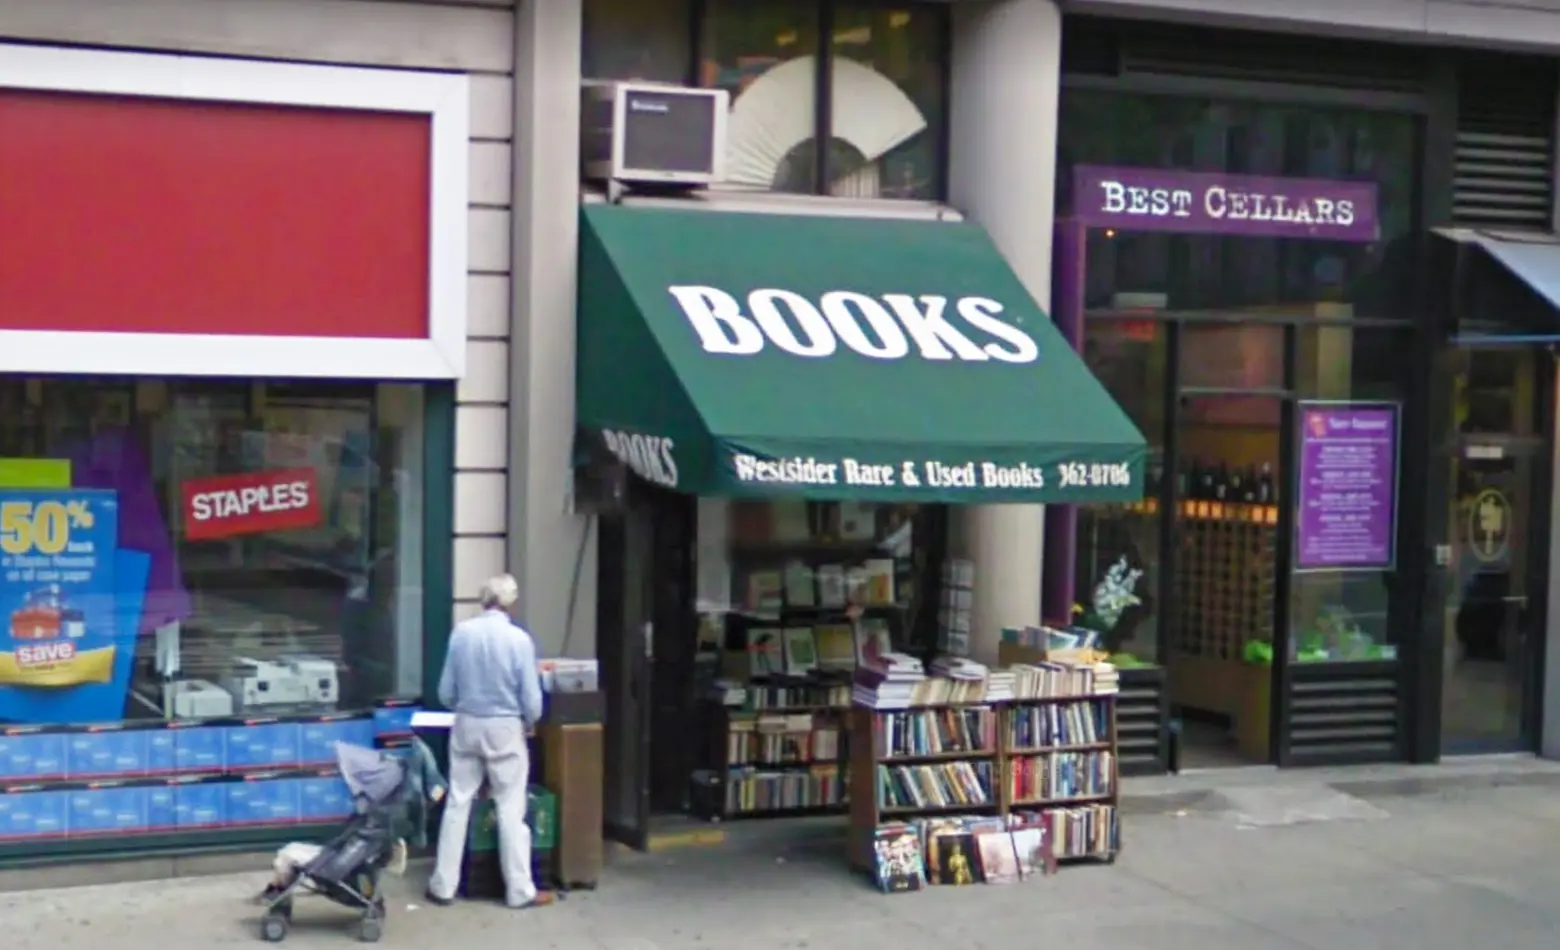 Campaign to save Westsider Books raises $27,000 in just one day